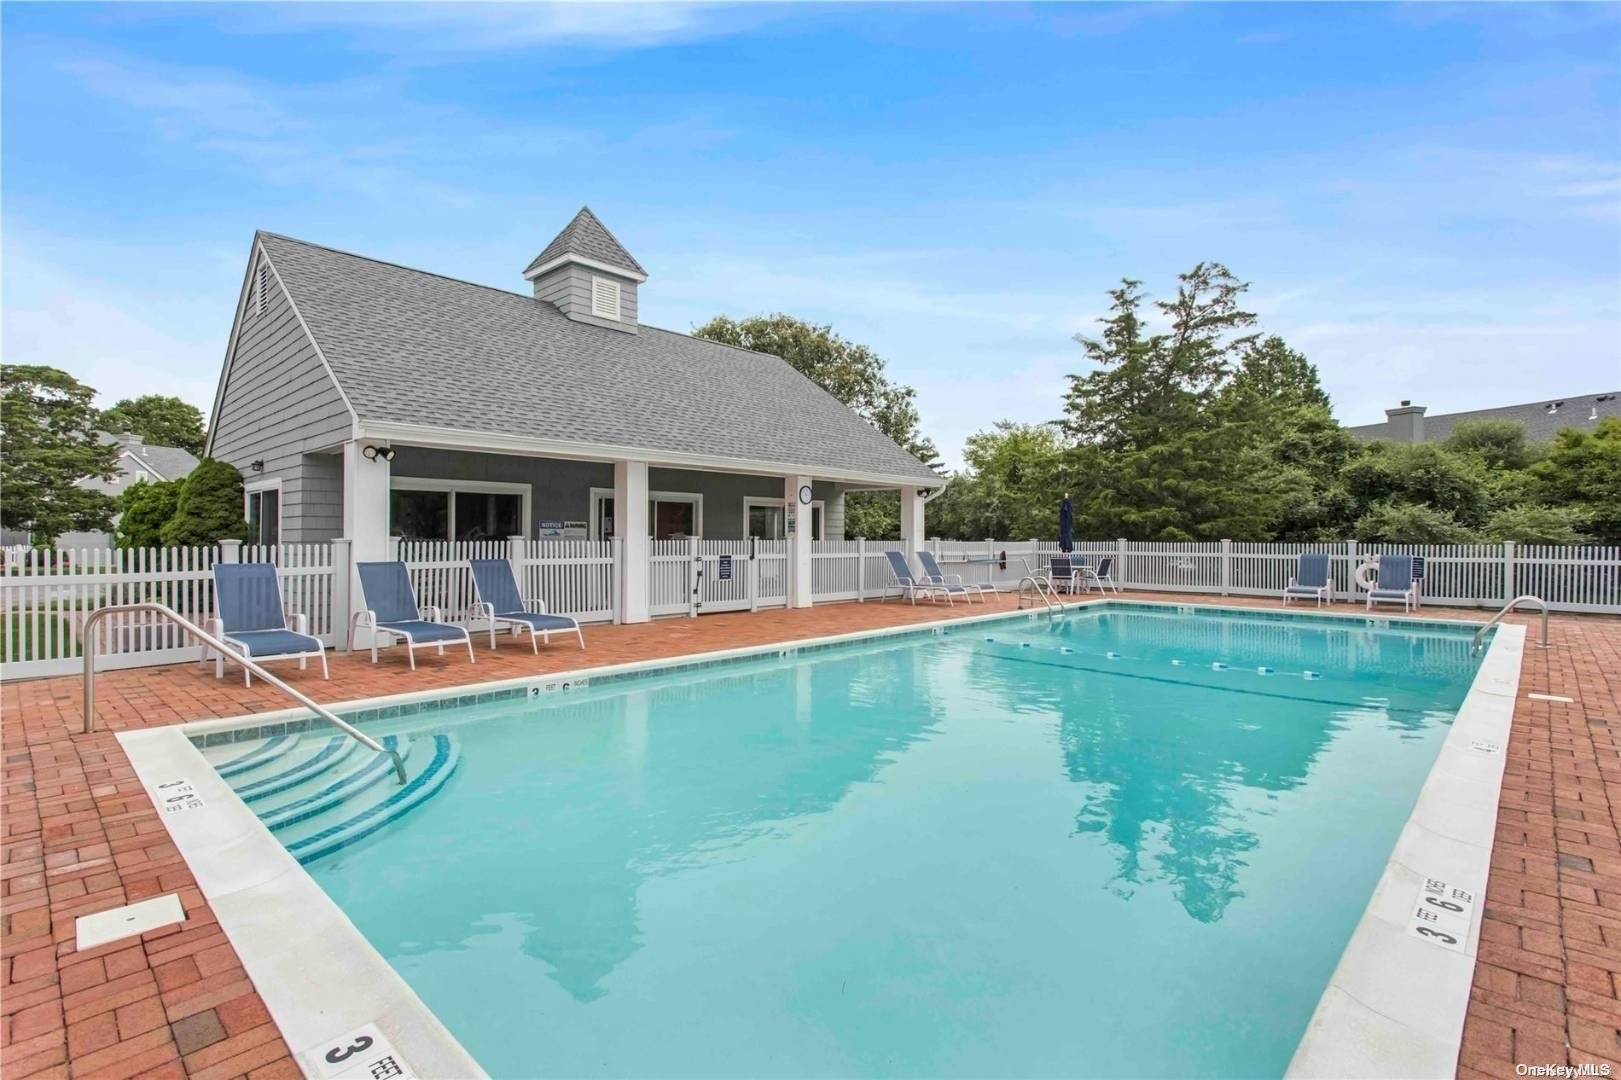 Located close to the Village and fabulous ocean beaches, this well maintained condo is the perfect place to relax and enjoy Summer in the Hamptons !